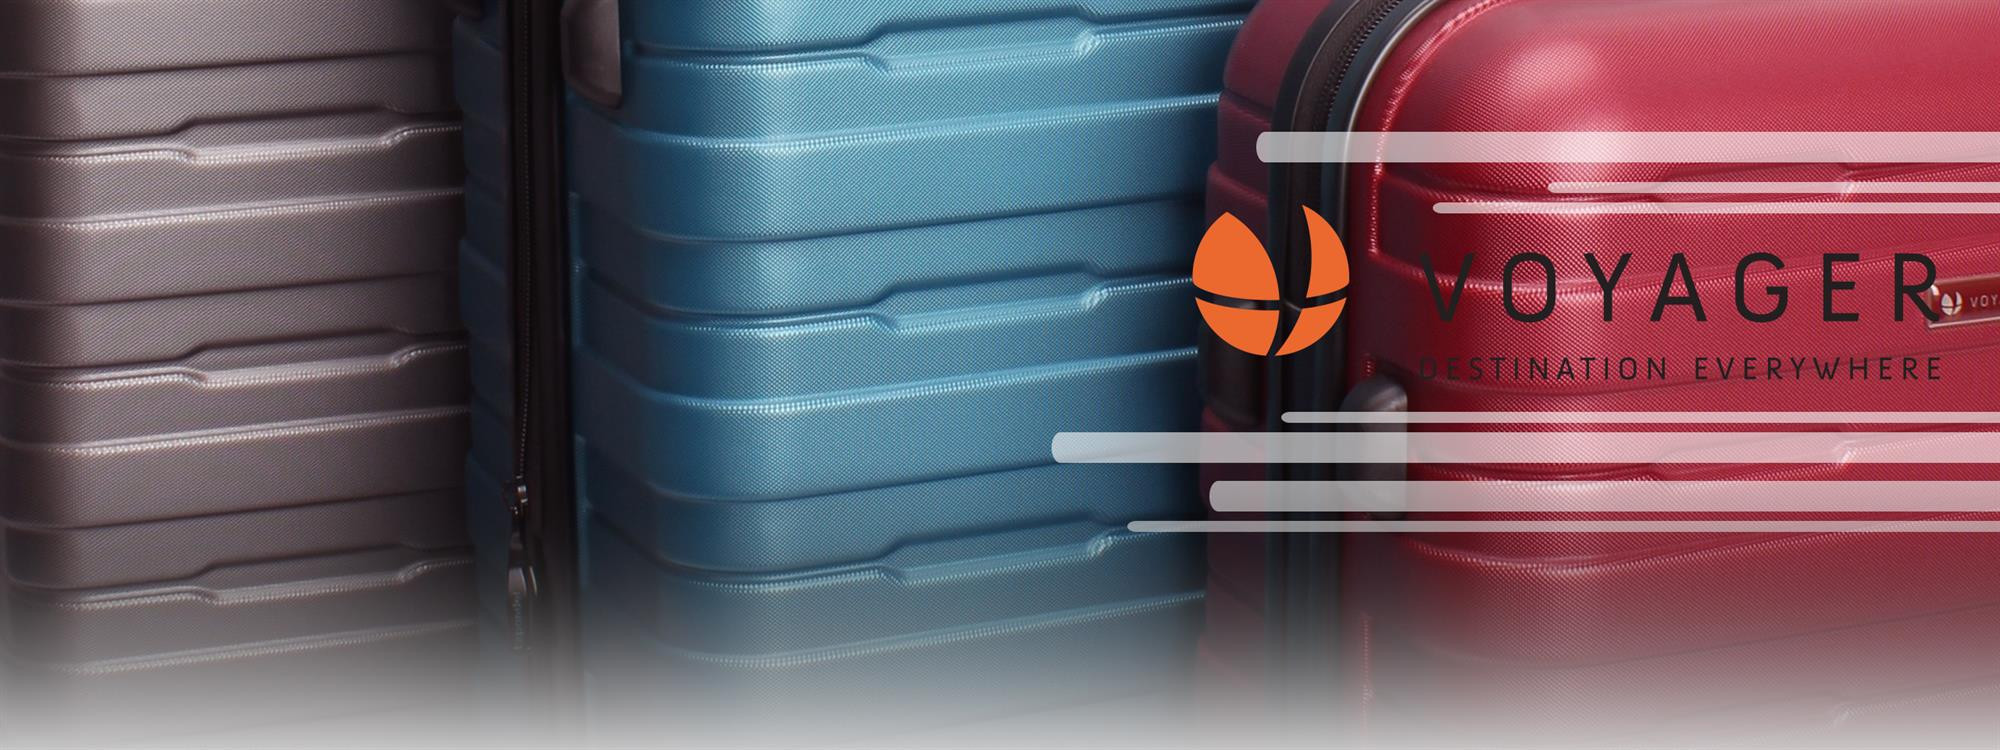 Netball New Zealand have joined the All Blacks in agreeing a sponsorship deal with Voyager Luggage ©Voyager Luggage